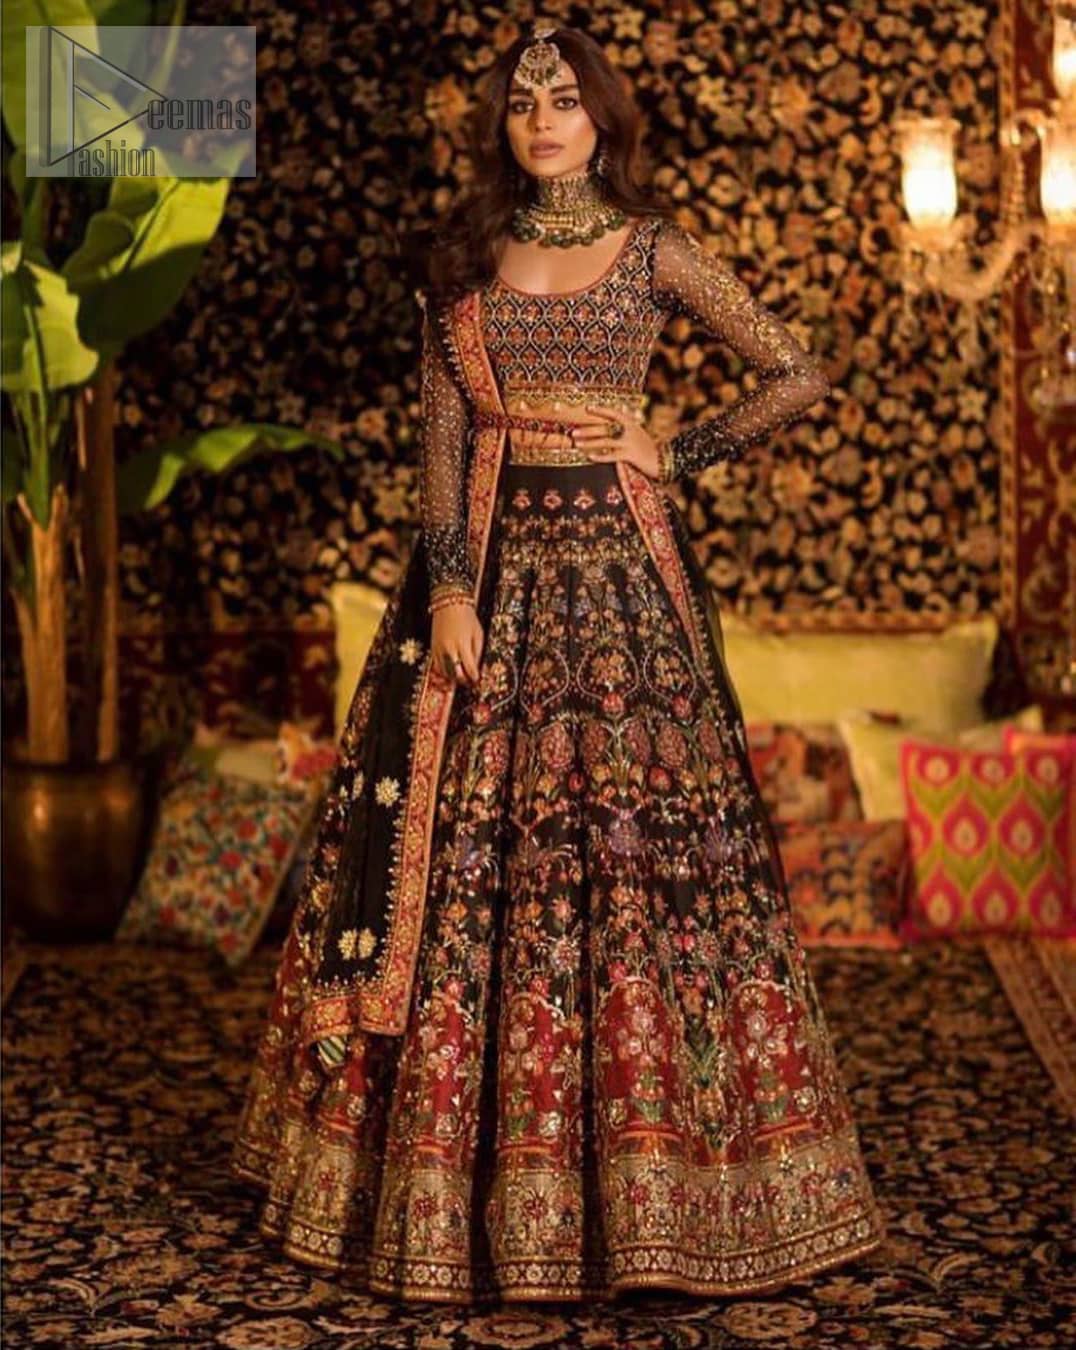 Tradition meets modernity. Go glam in our black traditional lehenga blouse. This outfit bursts of vibrant colors and sumptuous details of zardozi, gota, kora and dabka is a perfect Mehndi ensemble. It is aesthetically designed with thick borders and floral bunches refined the classical royal look. Blouse is decorated with geometric patterns having full sleeves adorned with zardosi work and sprinkled sequins. Style it up with black net dupatta sprinkled with tiny floral motifs and four sided applique embellishment. The piece comes with a handcrafted belt.